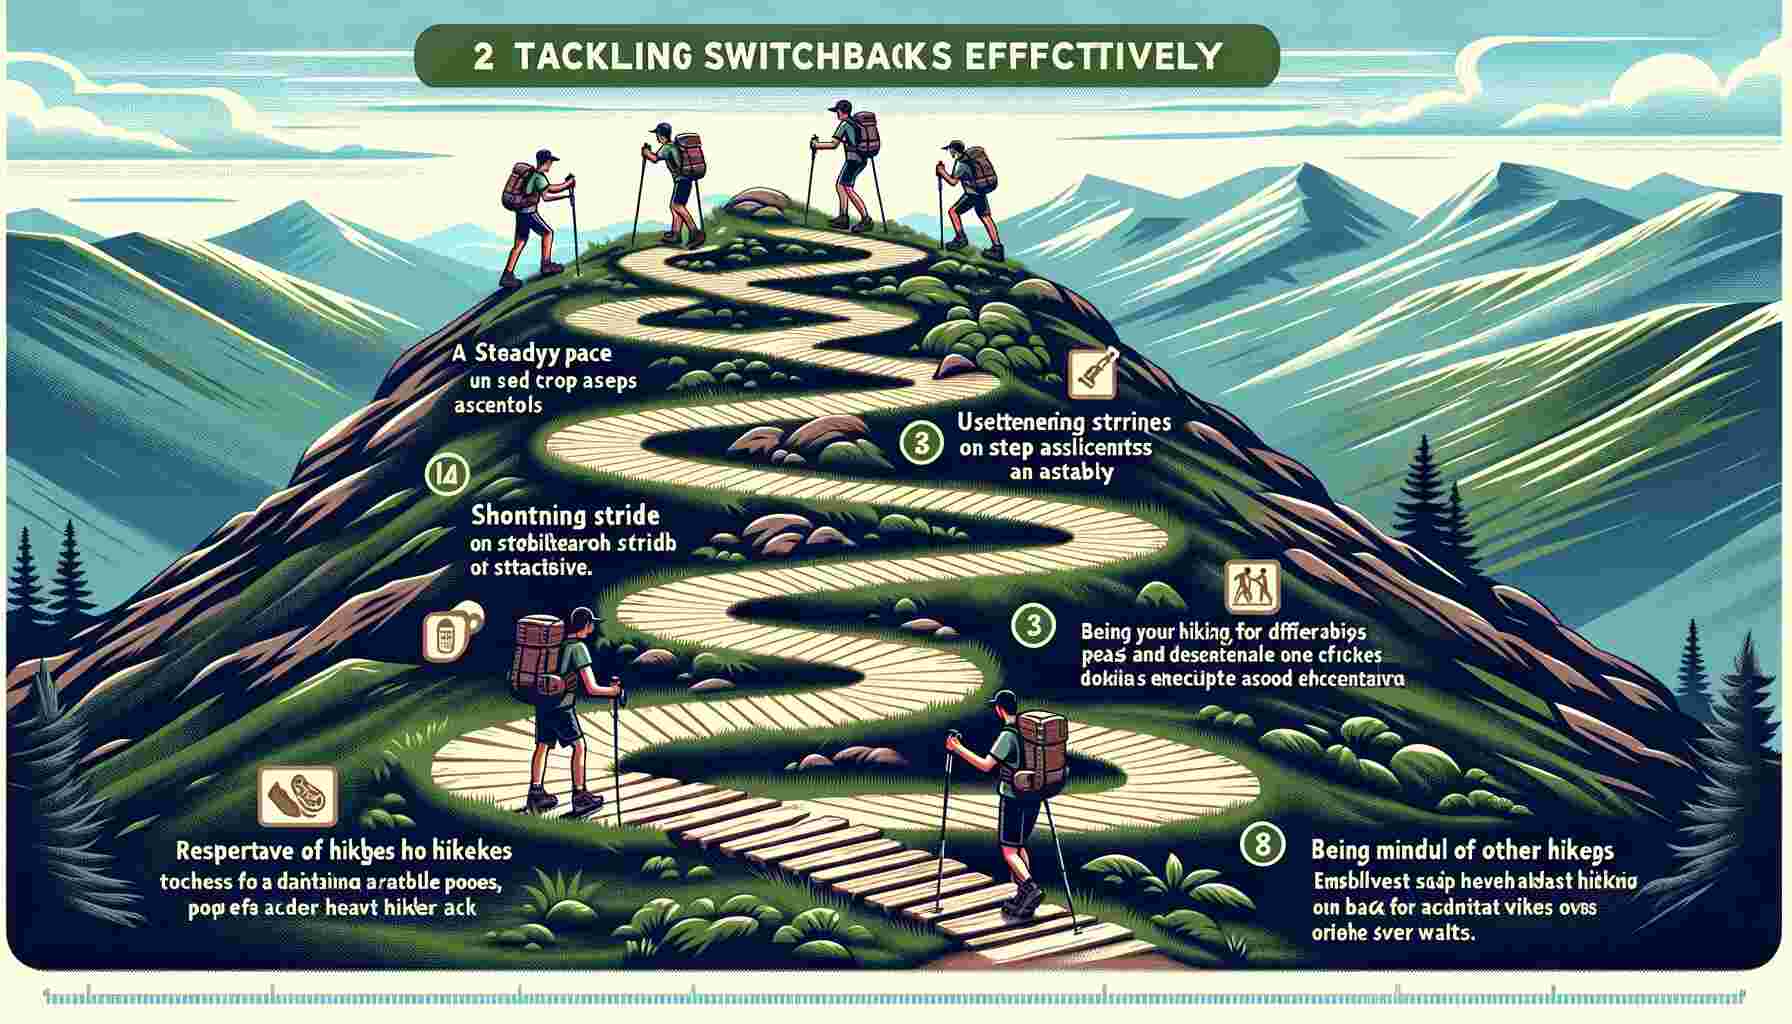 An image depicting a hiker employing various techniques on a switchback trail, including maintaining a steady pace, using appropriate footwear, adjusting stride on steep ascents, maintaining good posture with the help of hiking poles, taking breaks to hydrate and snack, applying different methods for ascending and descending, and showing respect and mindfulness towards fellow hikers on a zig-zag path up a steep slope.